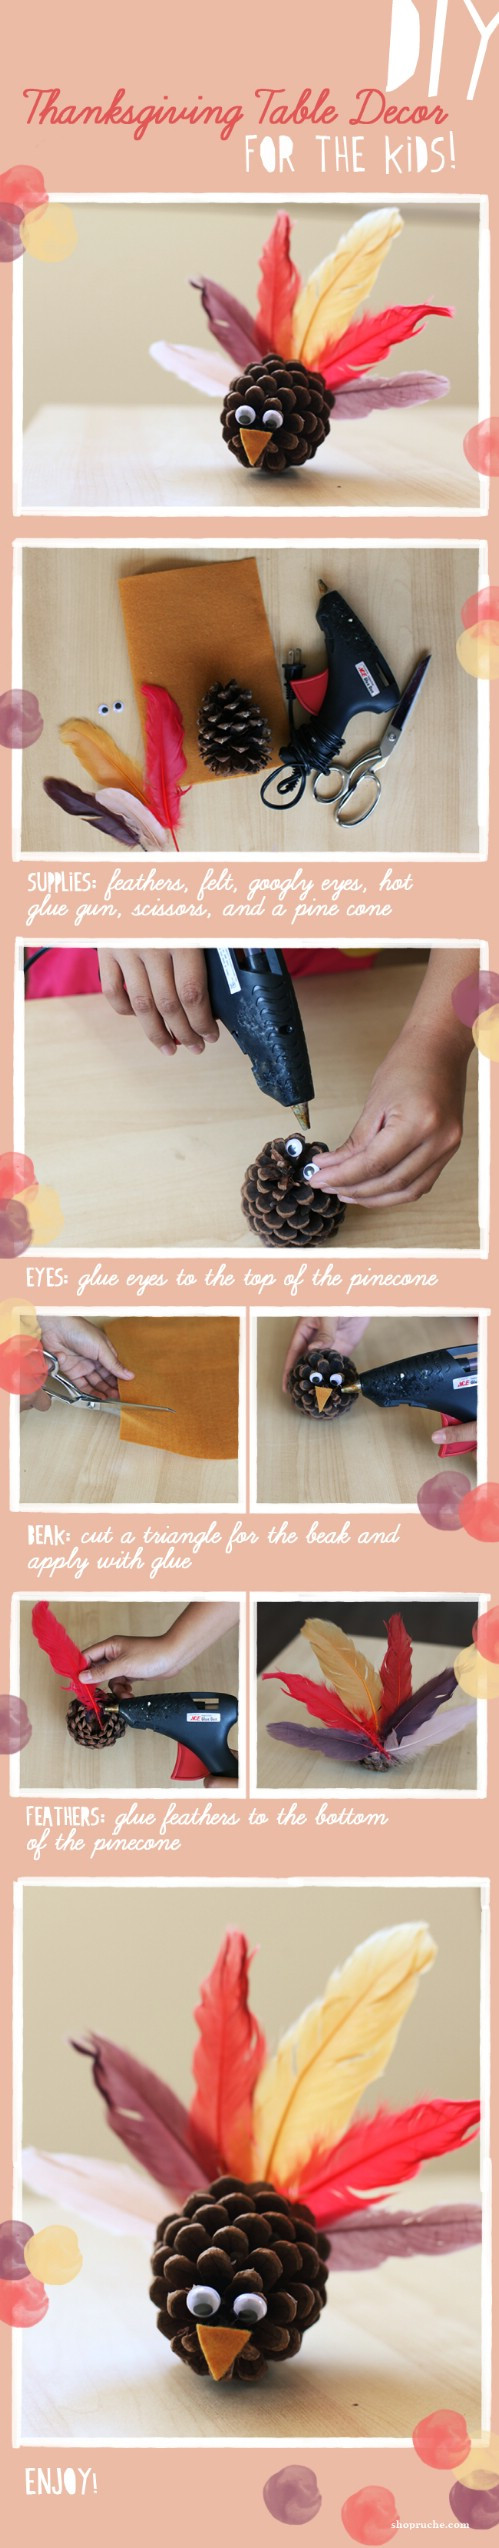 Thanksgiving Decor Diy
 15 Wonderful DIY Thanksgiving Decorations For Your Home